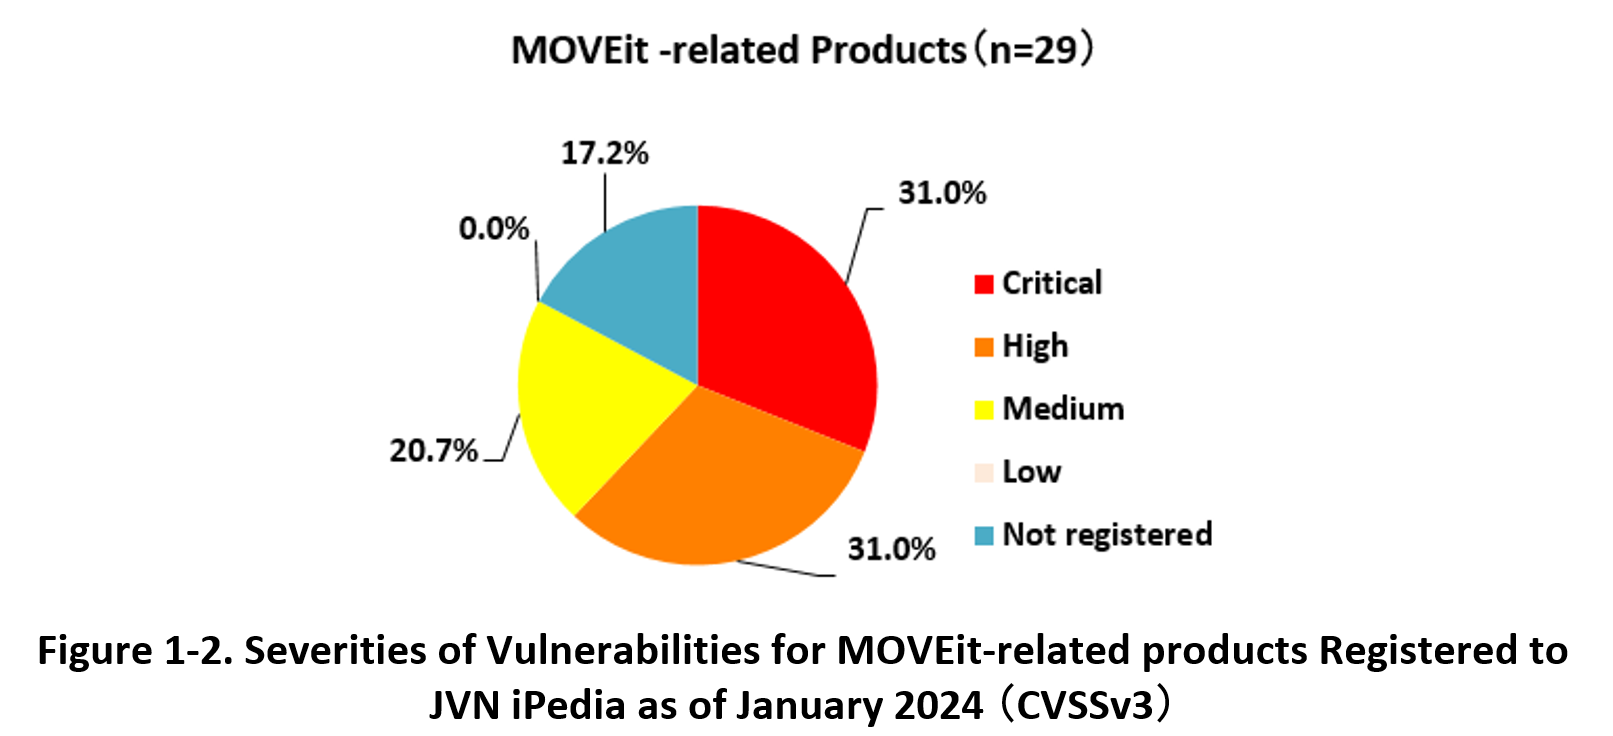 Figure 1-2. Severities of Vulnerabilities for MOVEit-related products Registered to JVN iPedia as of January 2024 (CVSSv3)